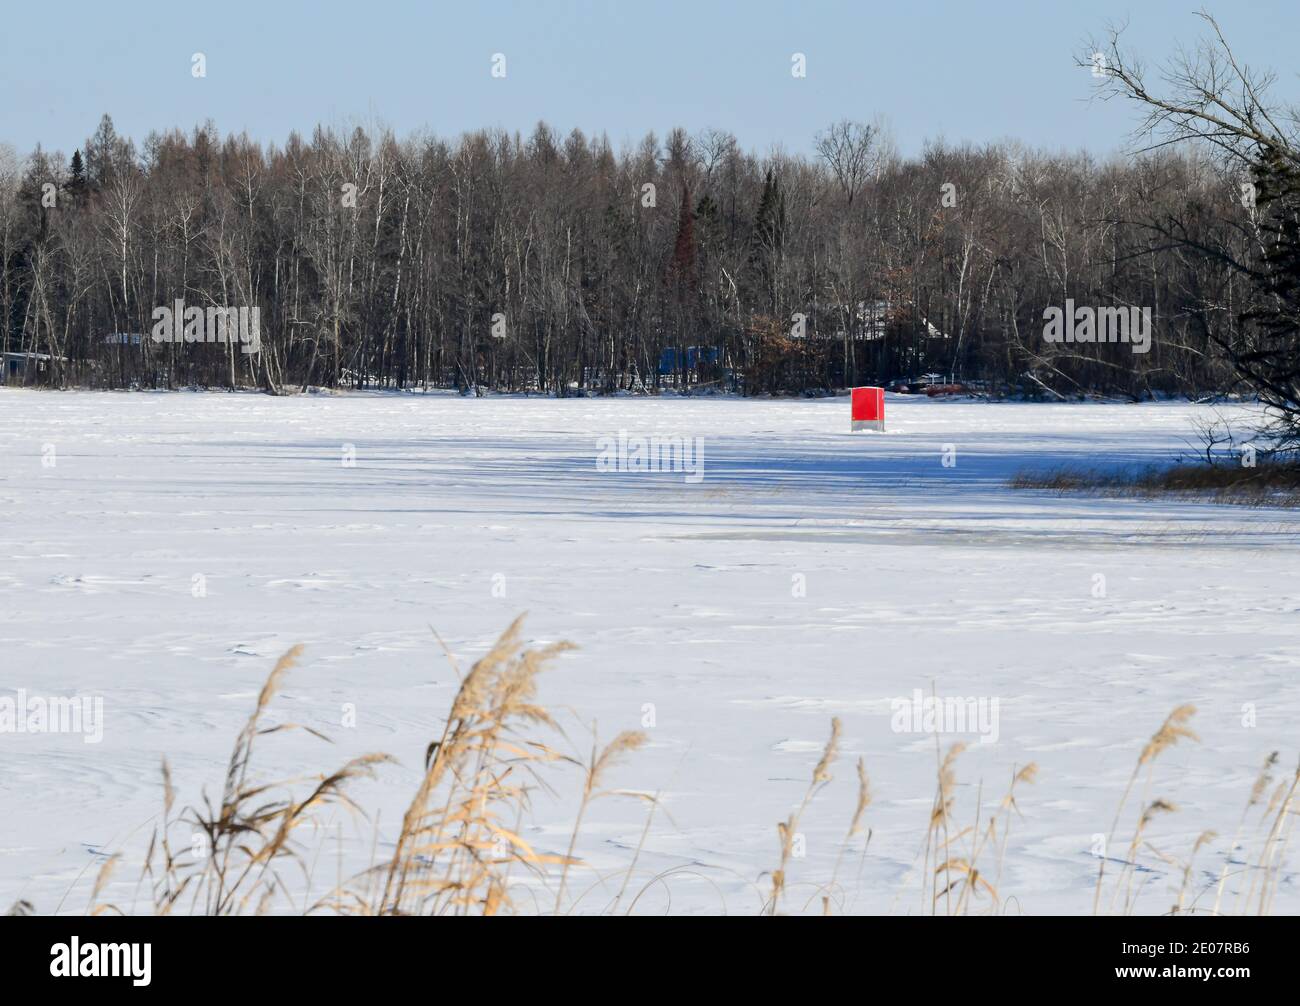 Little red ice fishing shanty on the frozen lake with snow and blue sky Stock Photo